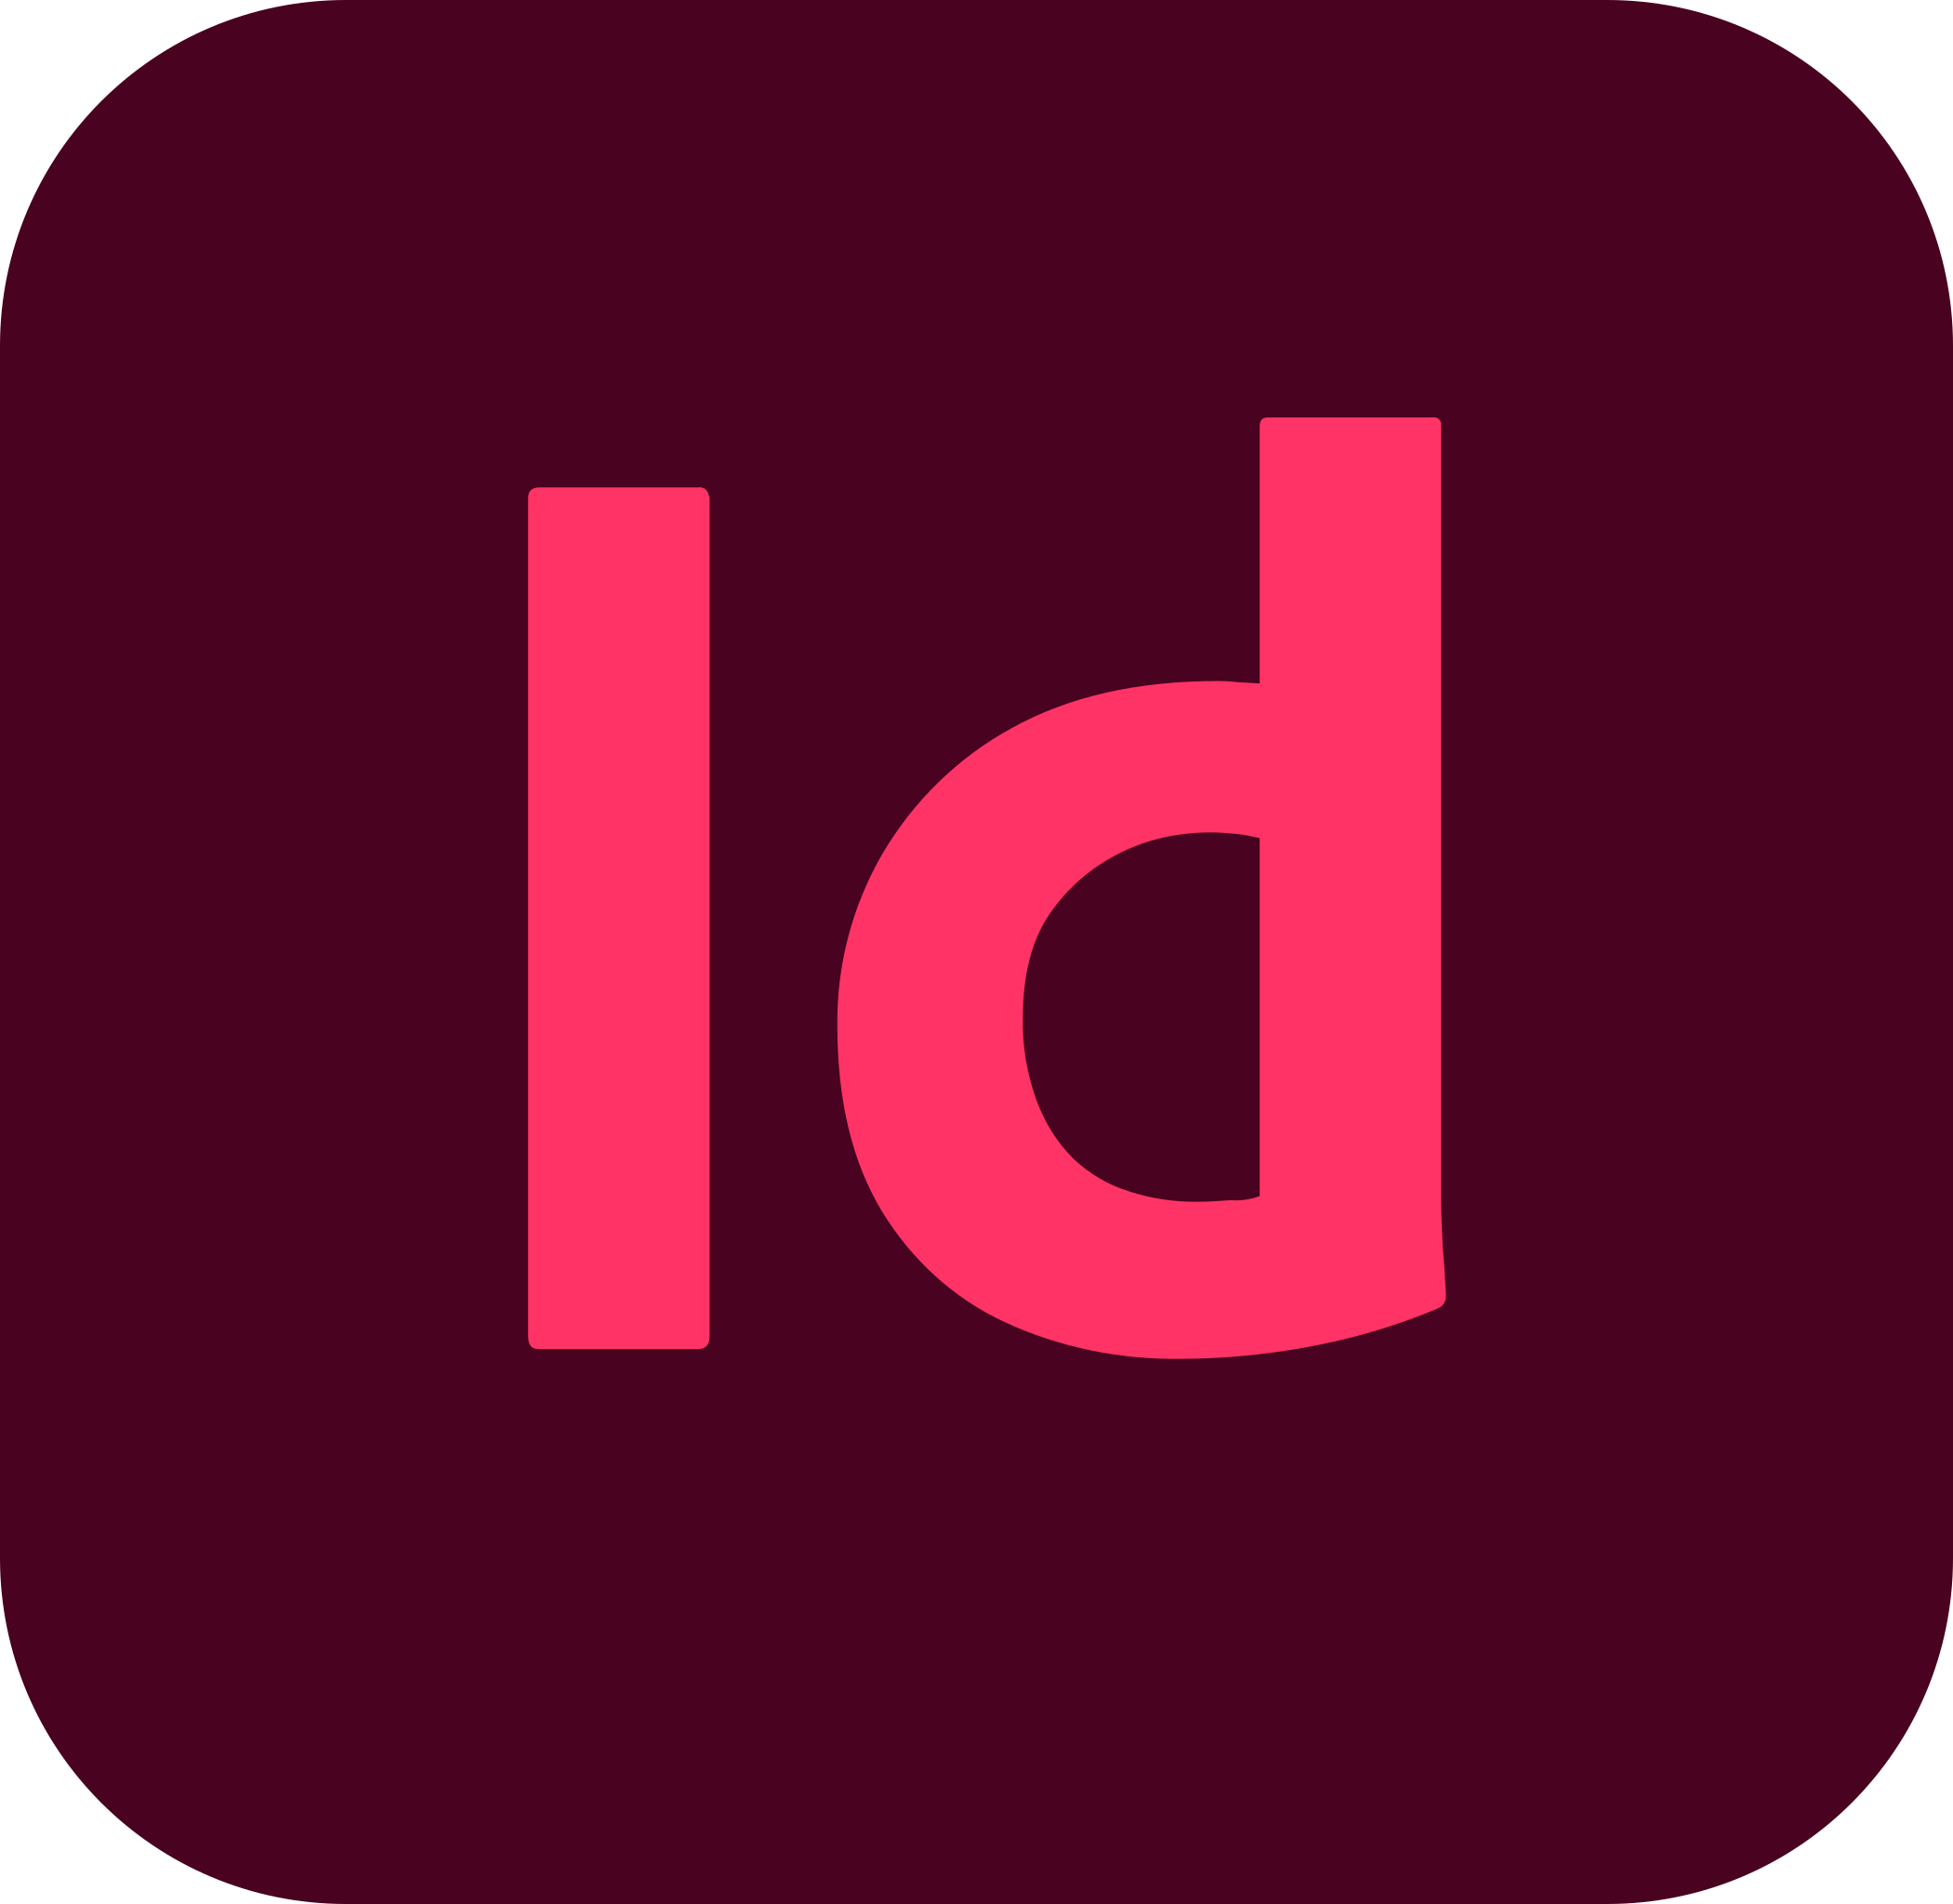 adobe-indesign-cc-icon.svg.png